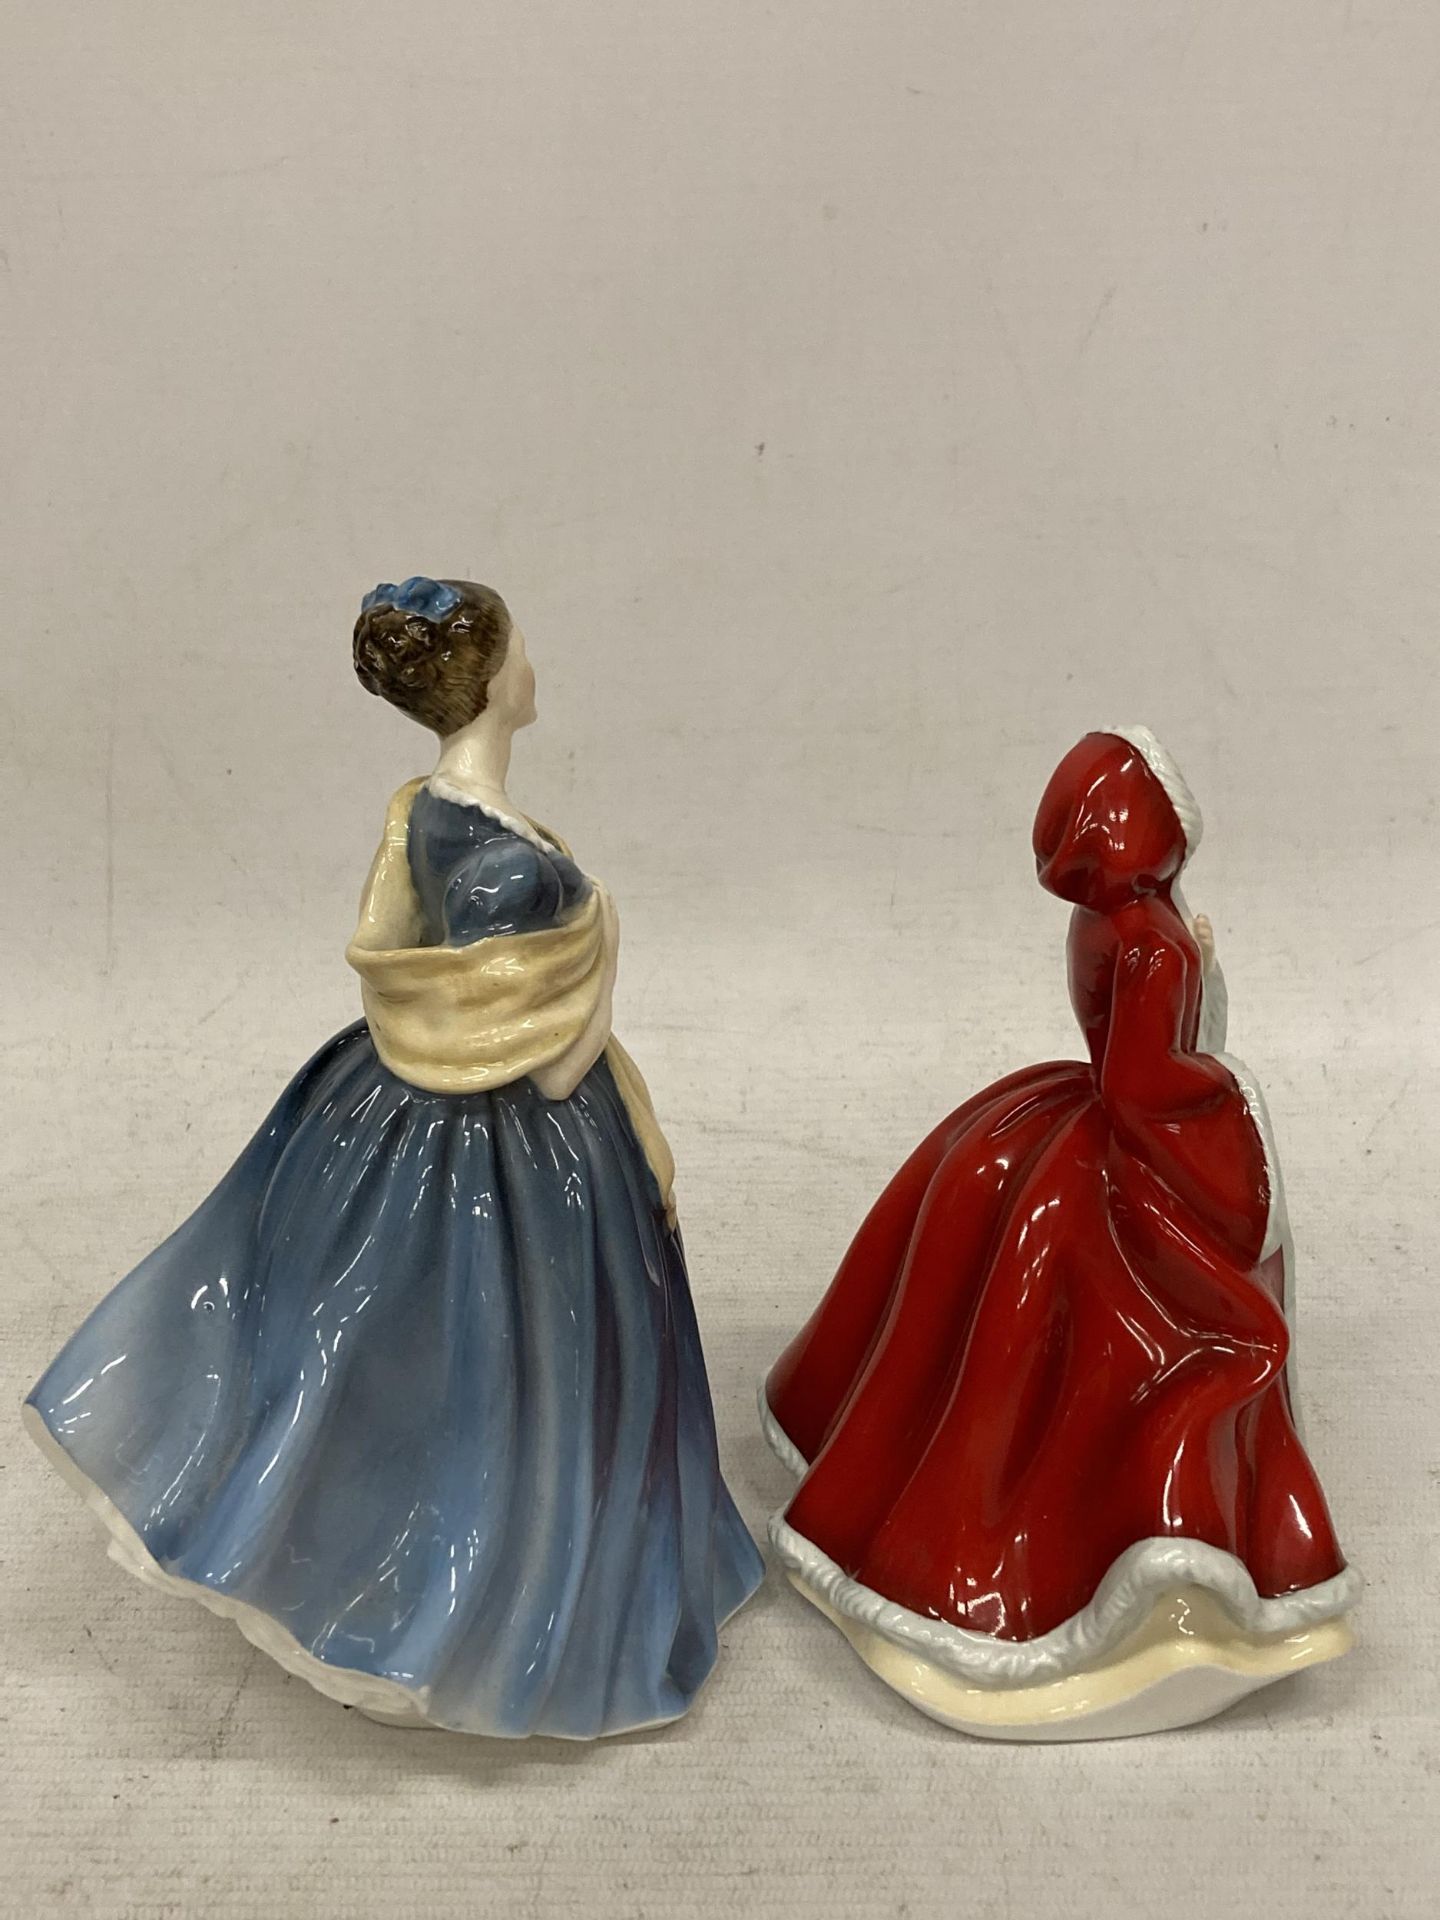 TWO ROYAL DOULTON FIGURINES "ADRIENNE" HN2304 AND FROM THE PRETTY LADIES BEST OF THE CLASSICS - Image 2 of 4